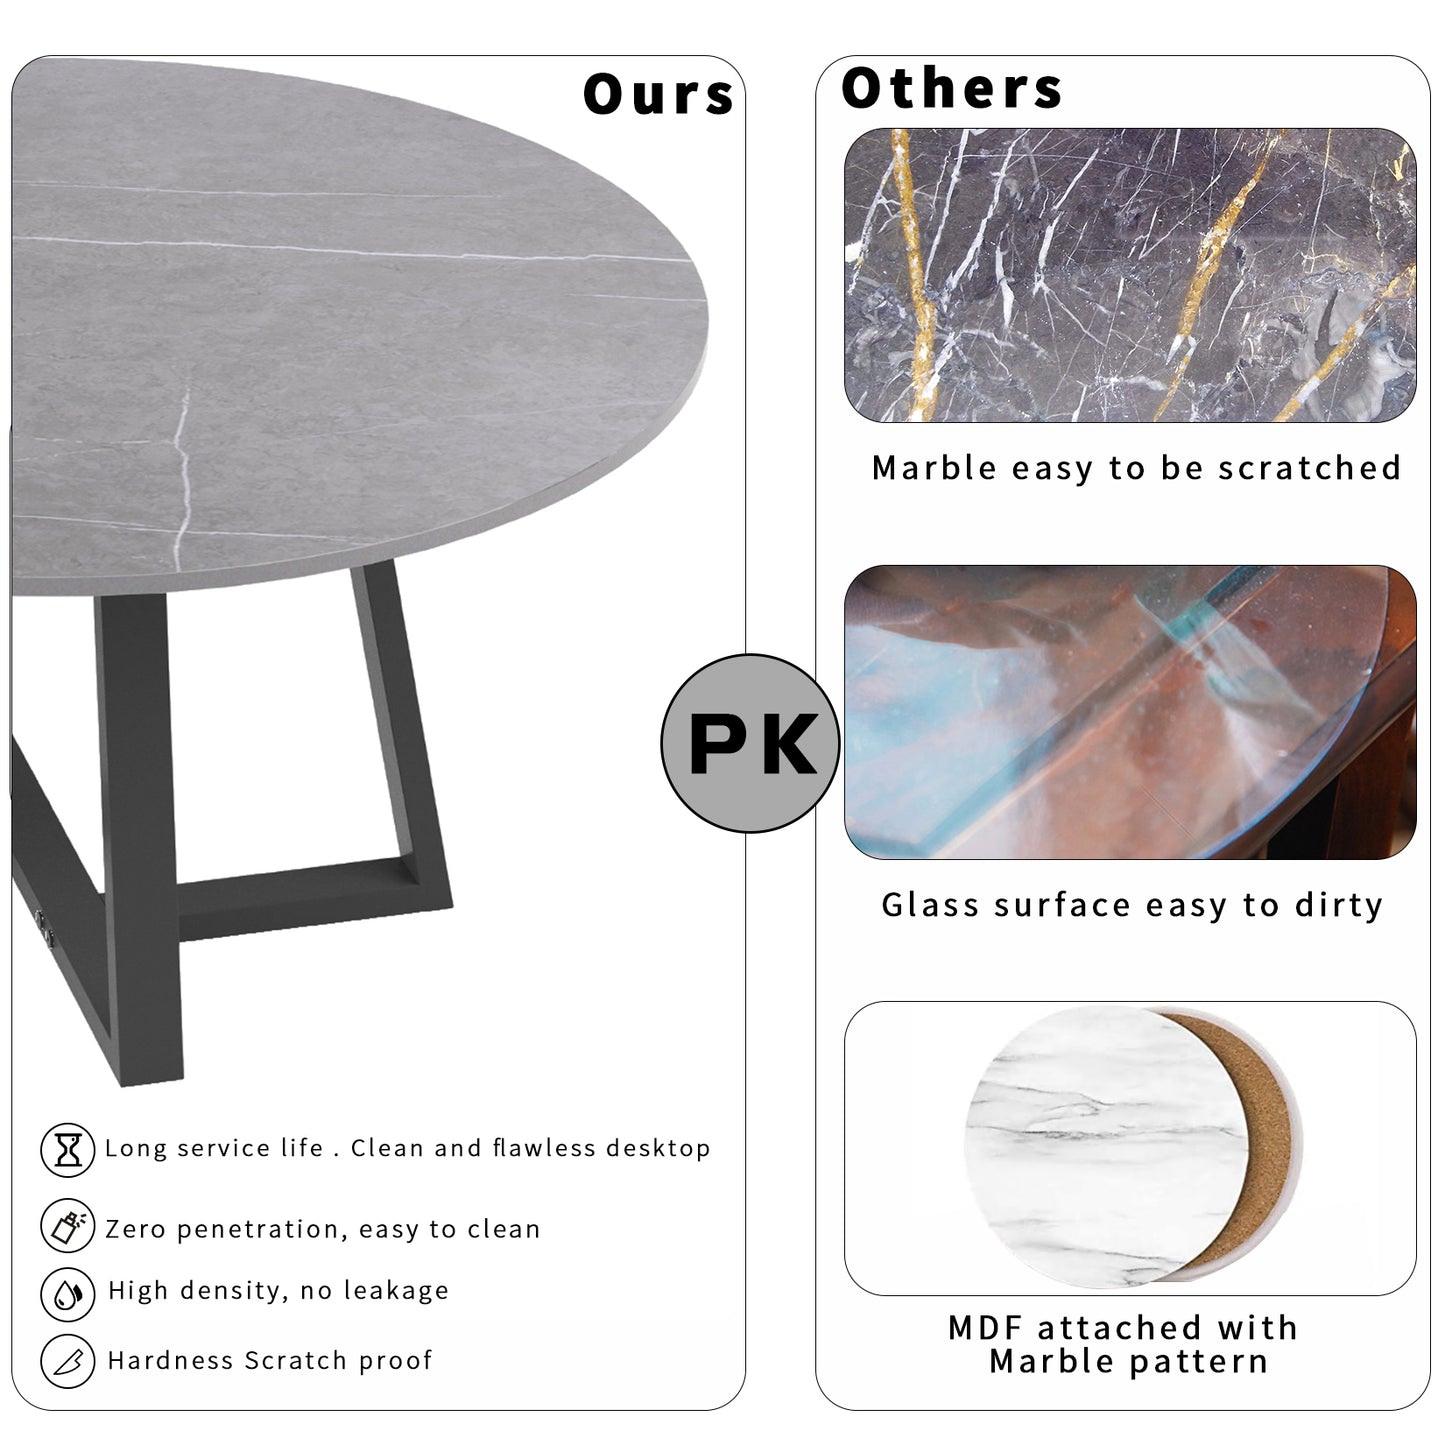 Set of 2 Round Sintered Stone Accent Coffee Tables, Grey Texture